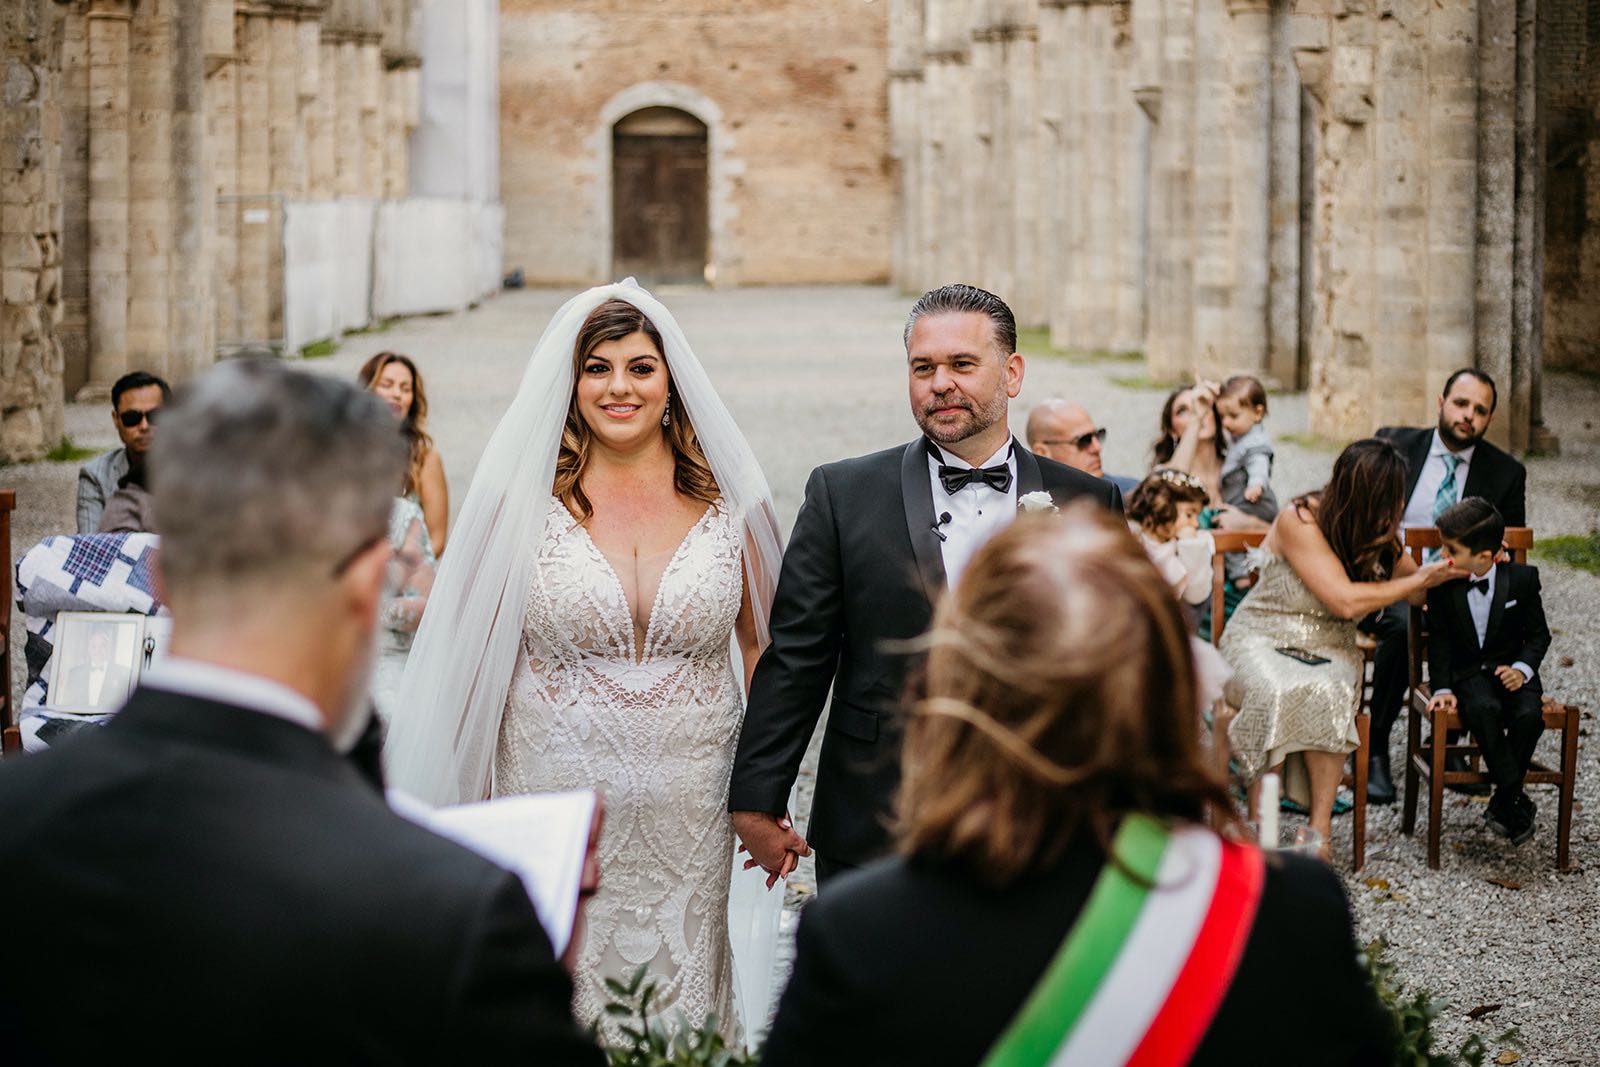 Is a Civil Wedding Ceremony in Italy Right For You?